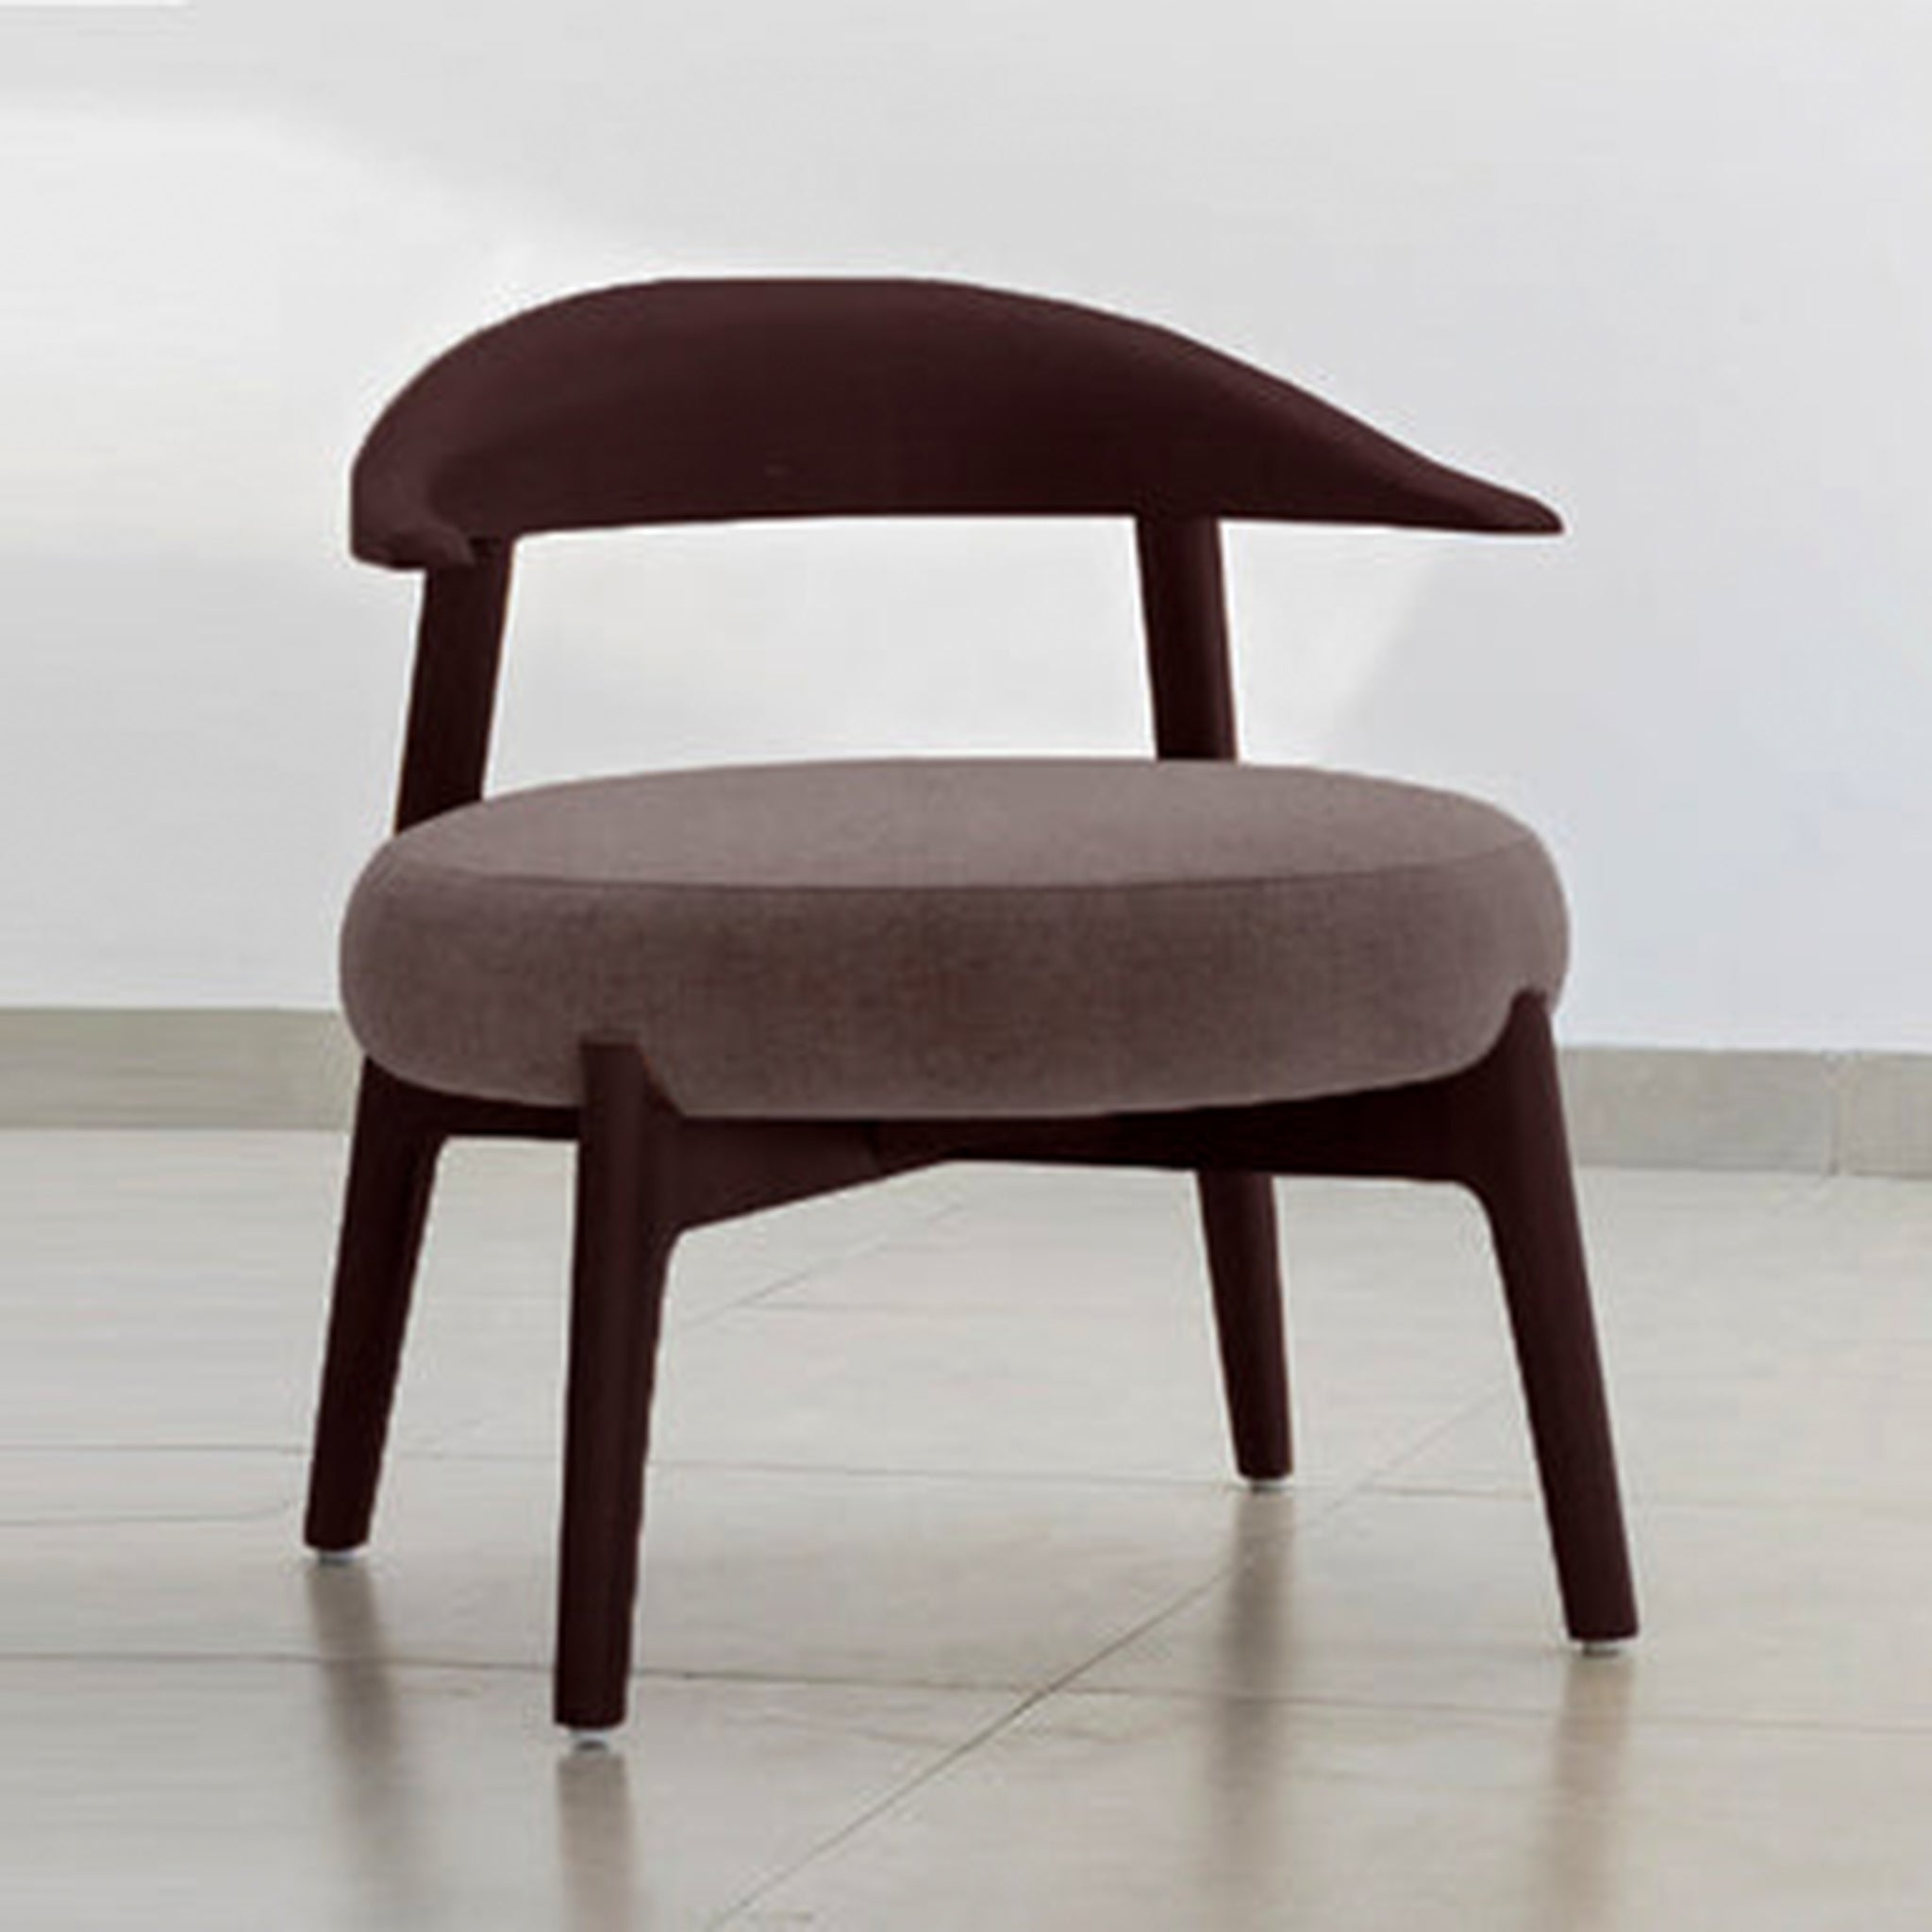 "Elegant and modern Hyde Accent Chair with ergonomic design"